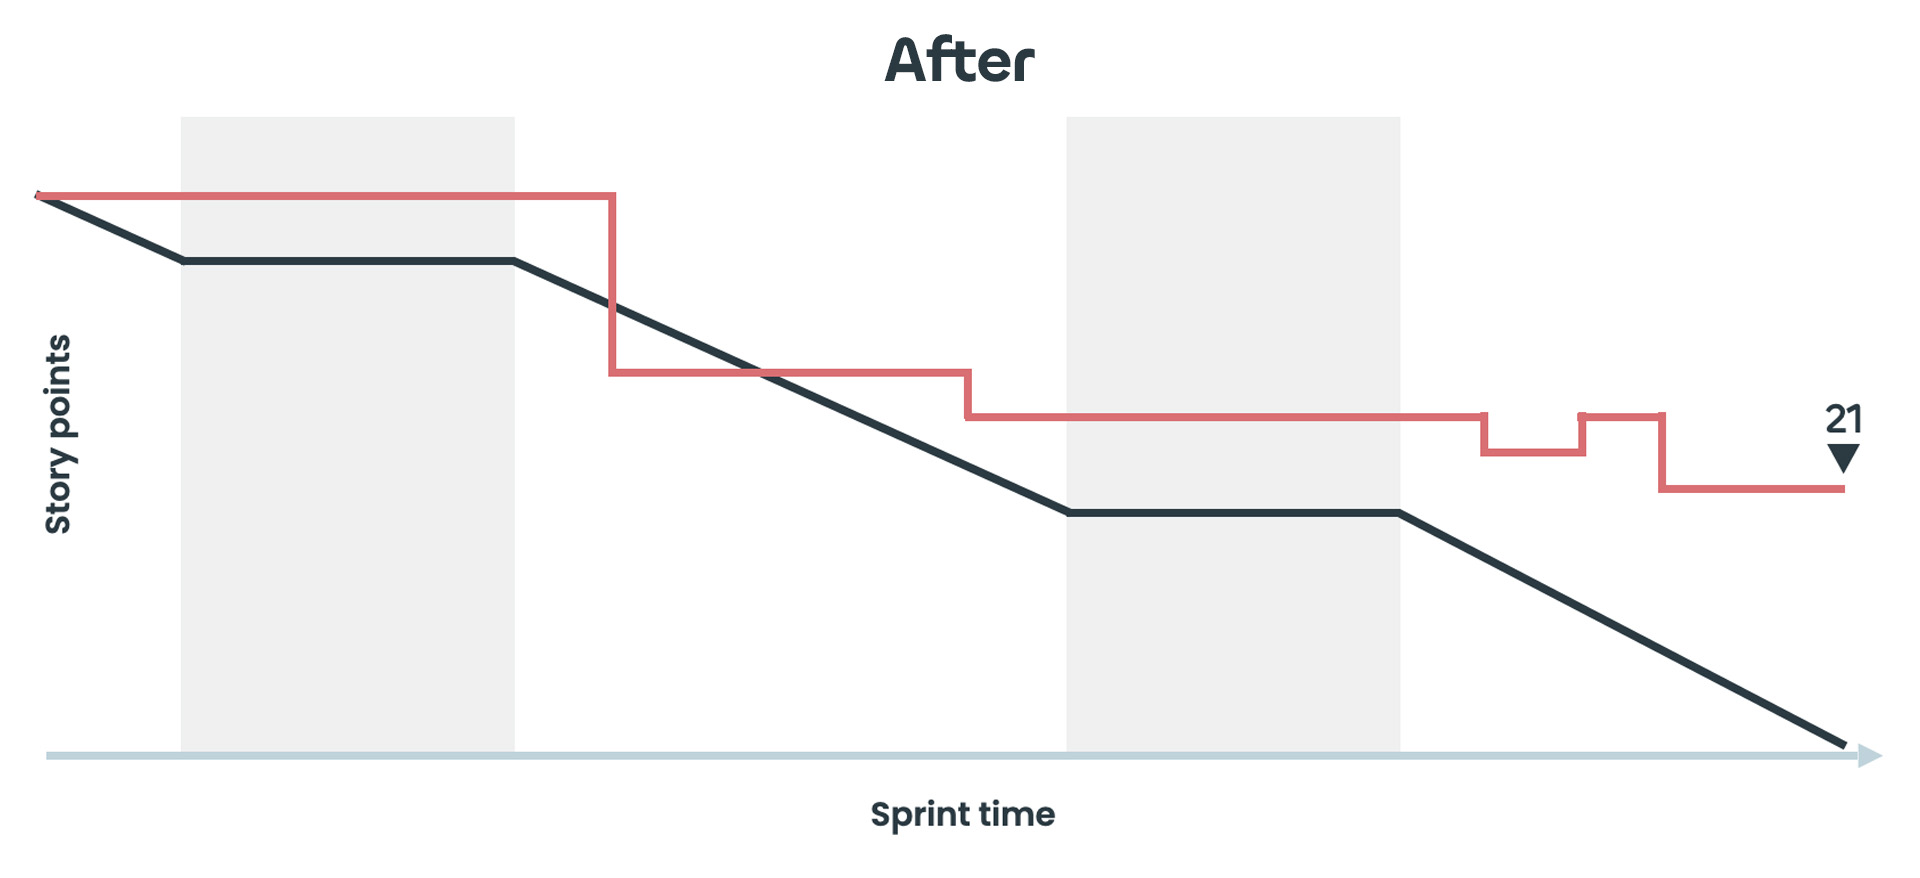 A graph showing the burndown in a sprint bafter the introduction of a component.